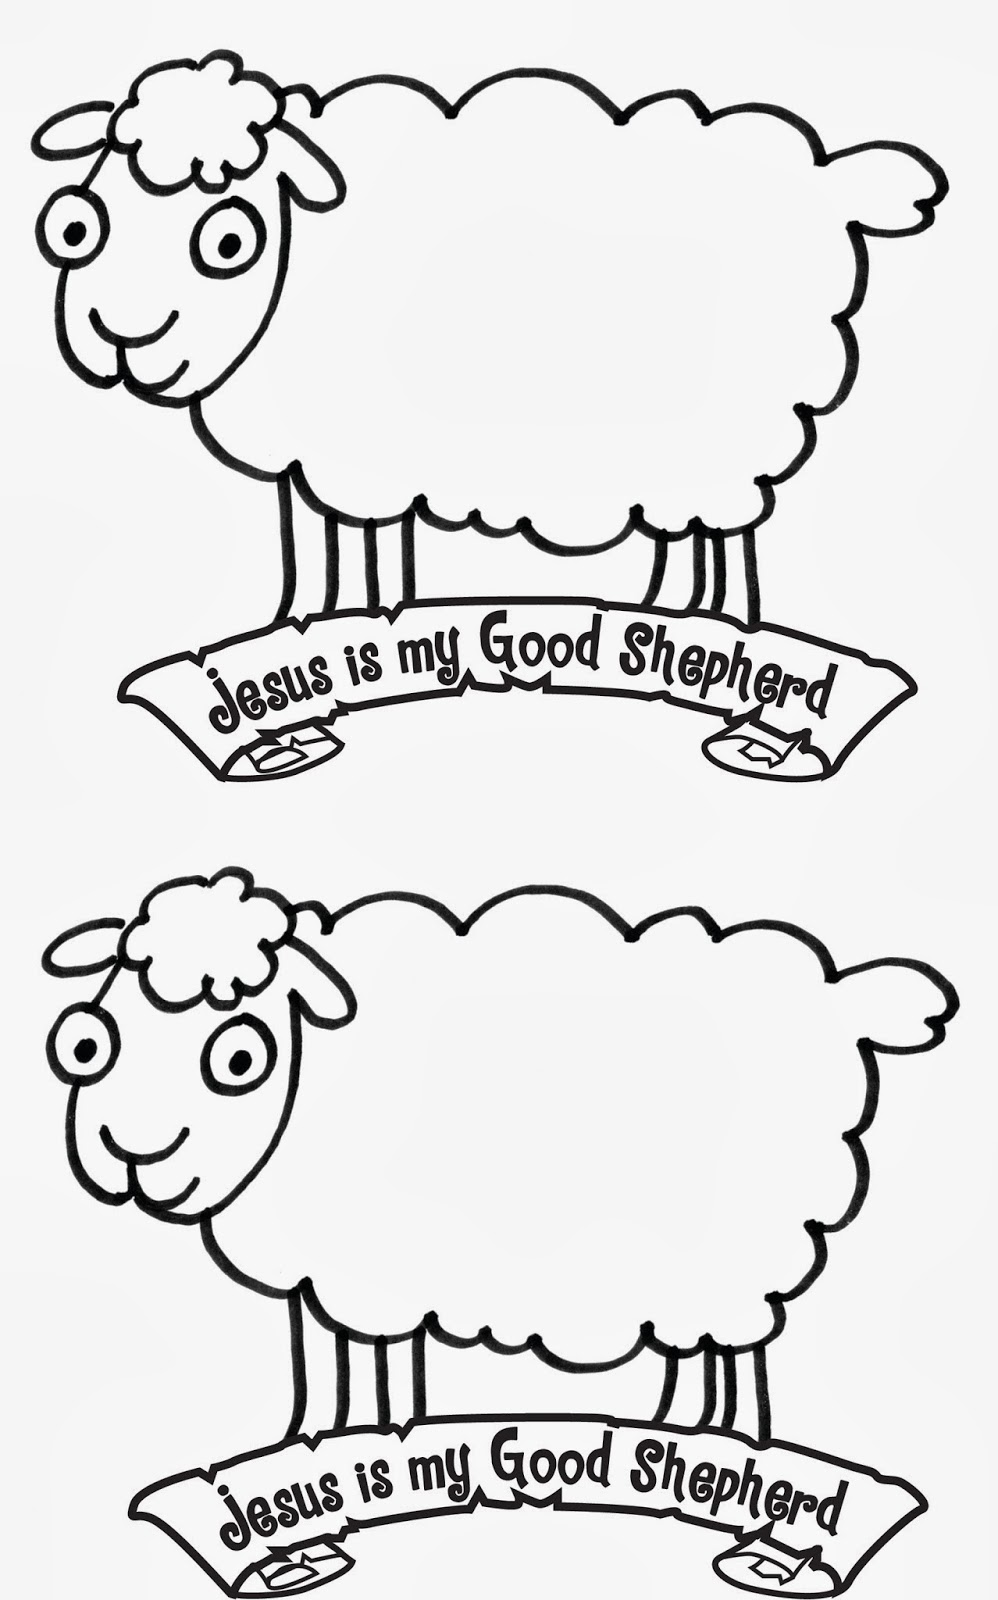 the lord is my shepherd clipart - photo #45